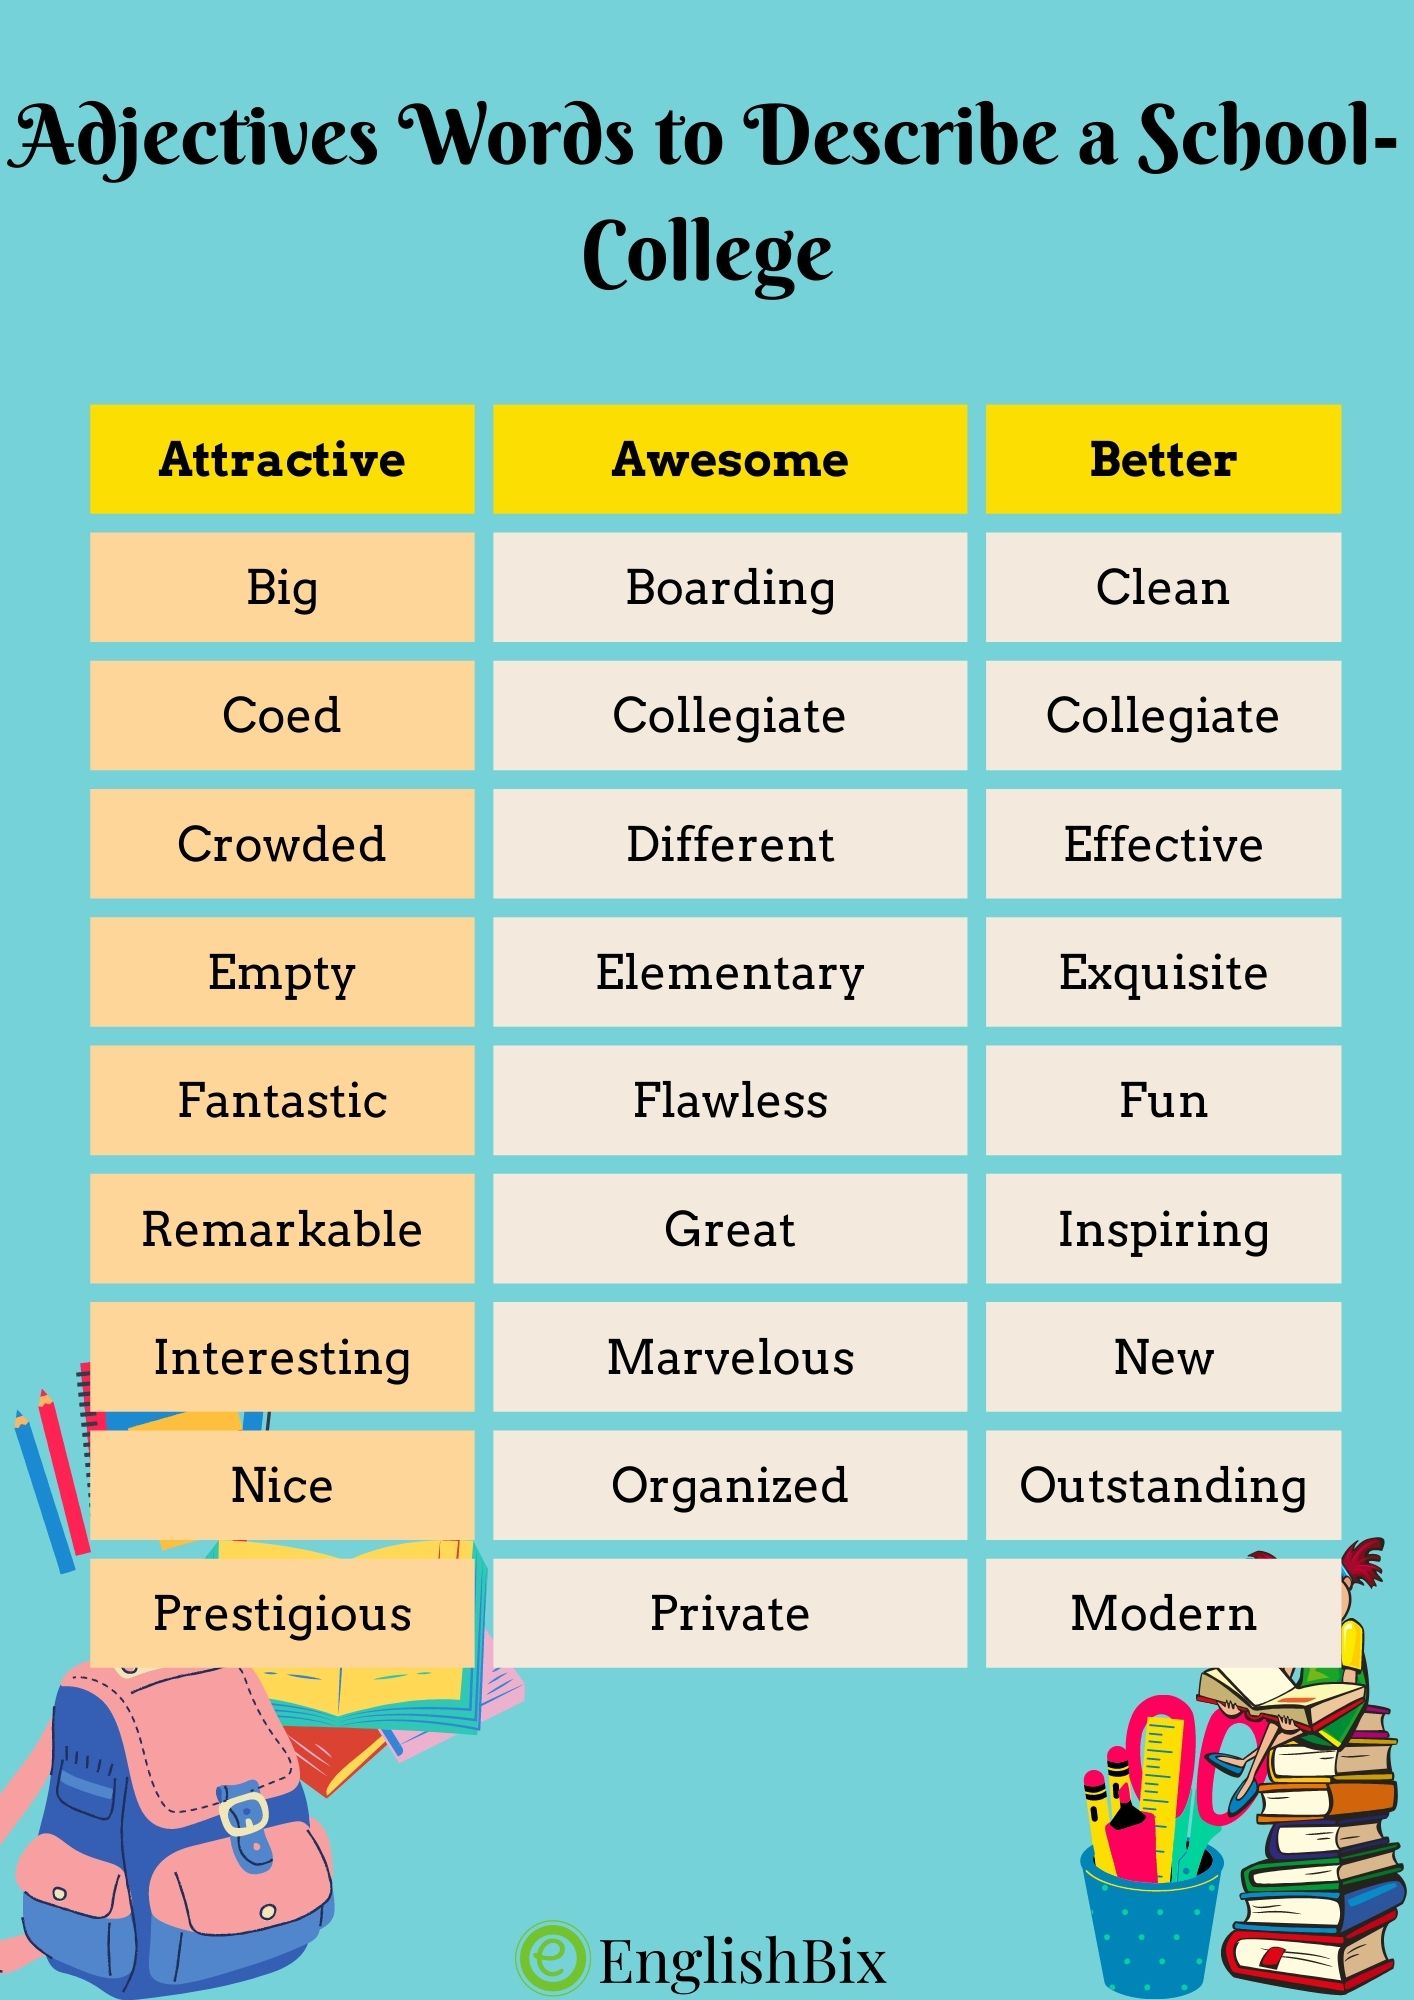 100+ Adjectives Words to Describe a School and College - EnglishBix